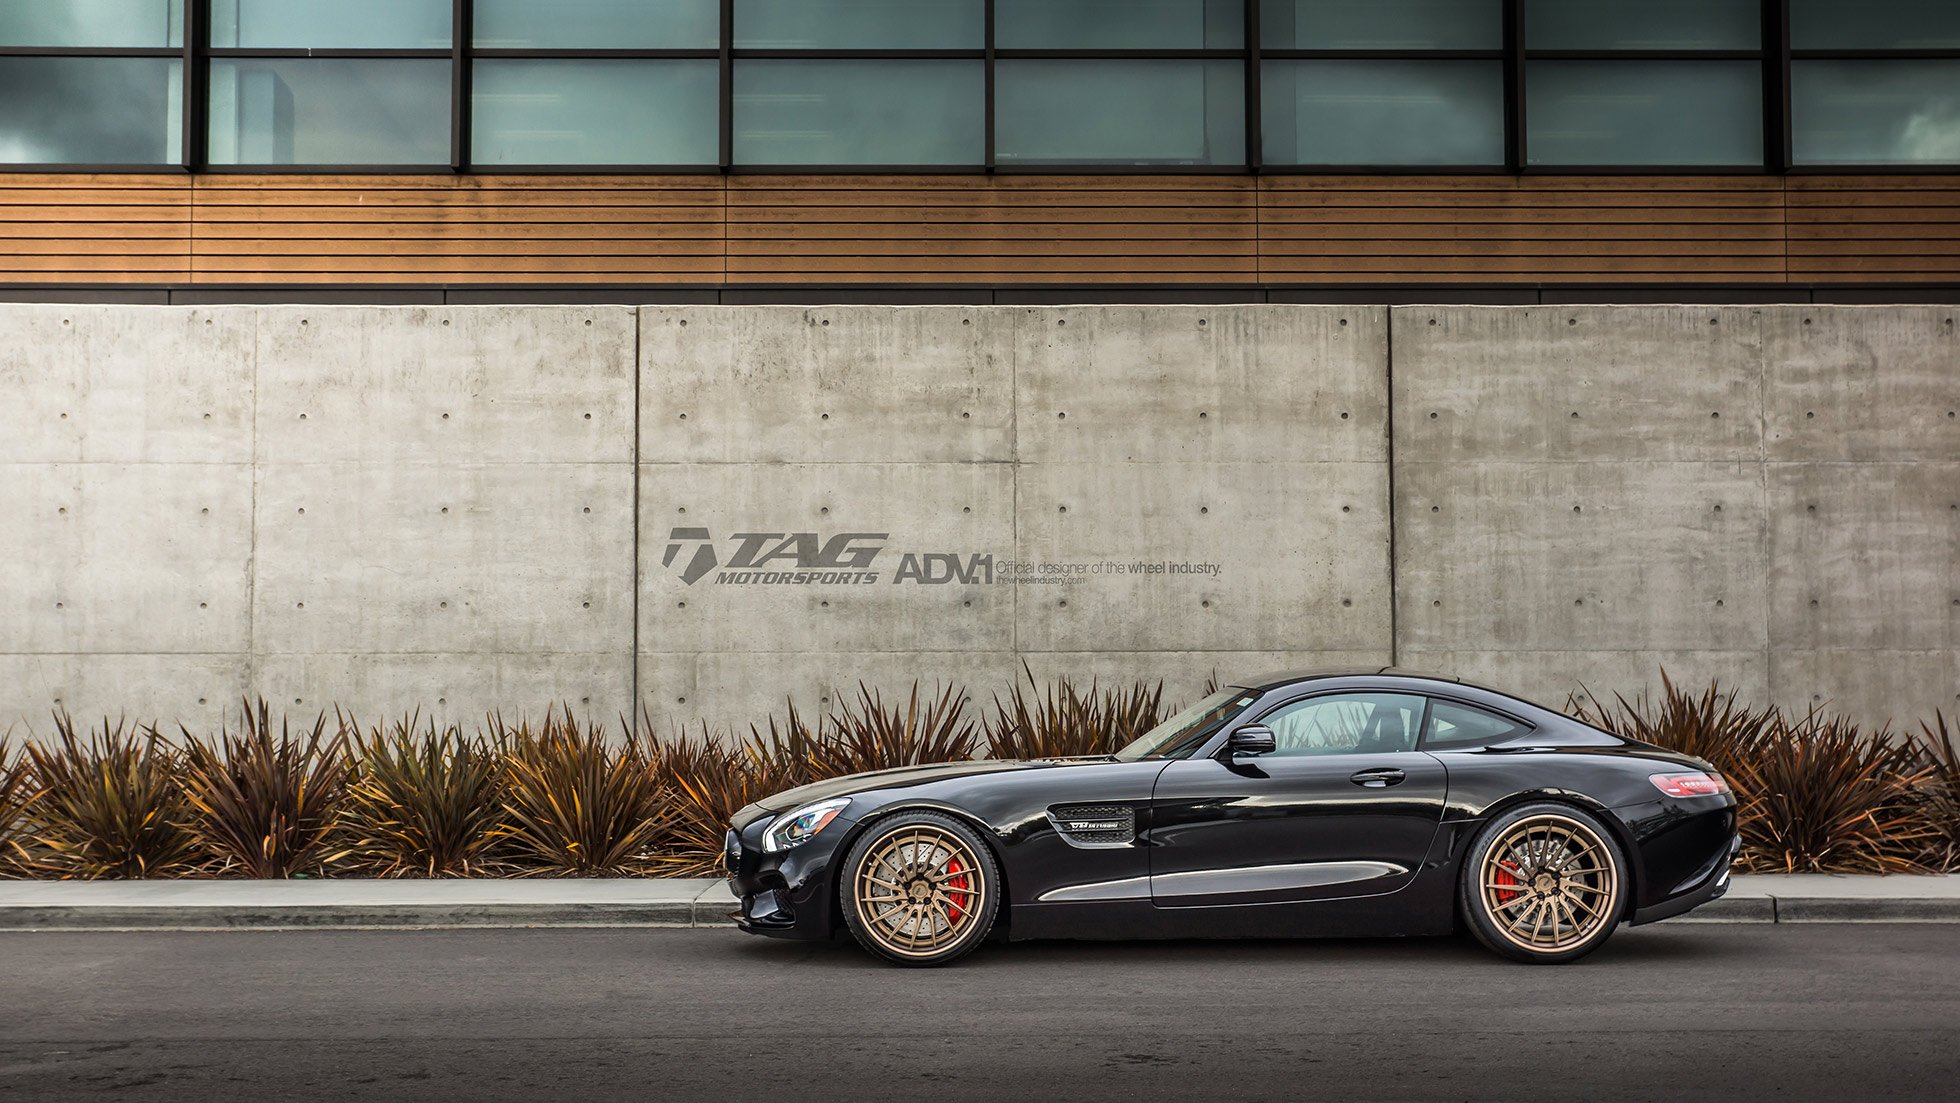 adv, 1, Wheels, Mercedes, Benz, Amg, Gt s, Coupe, Cars, Tuning, Black Wallpaper